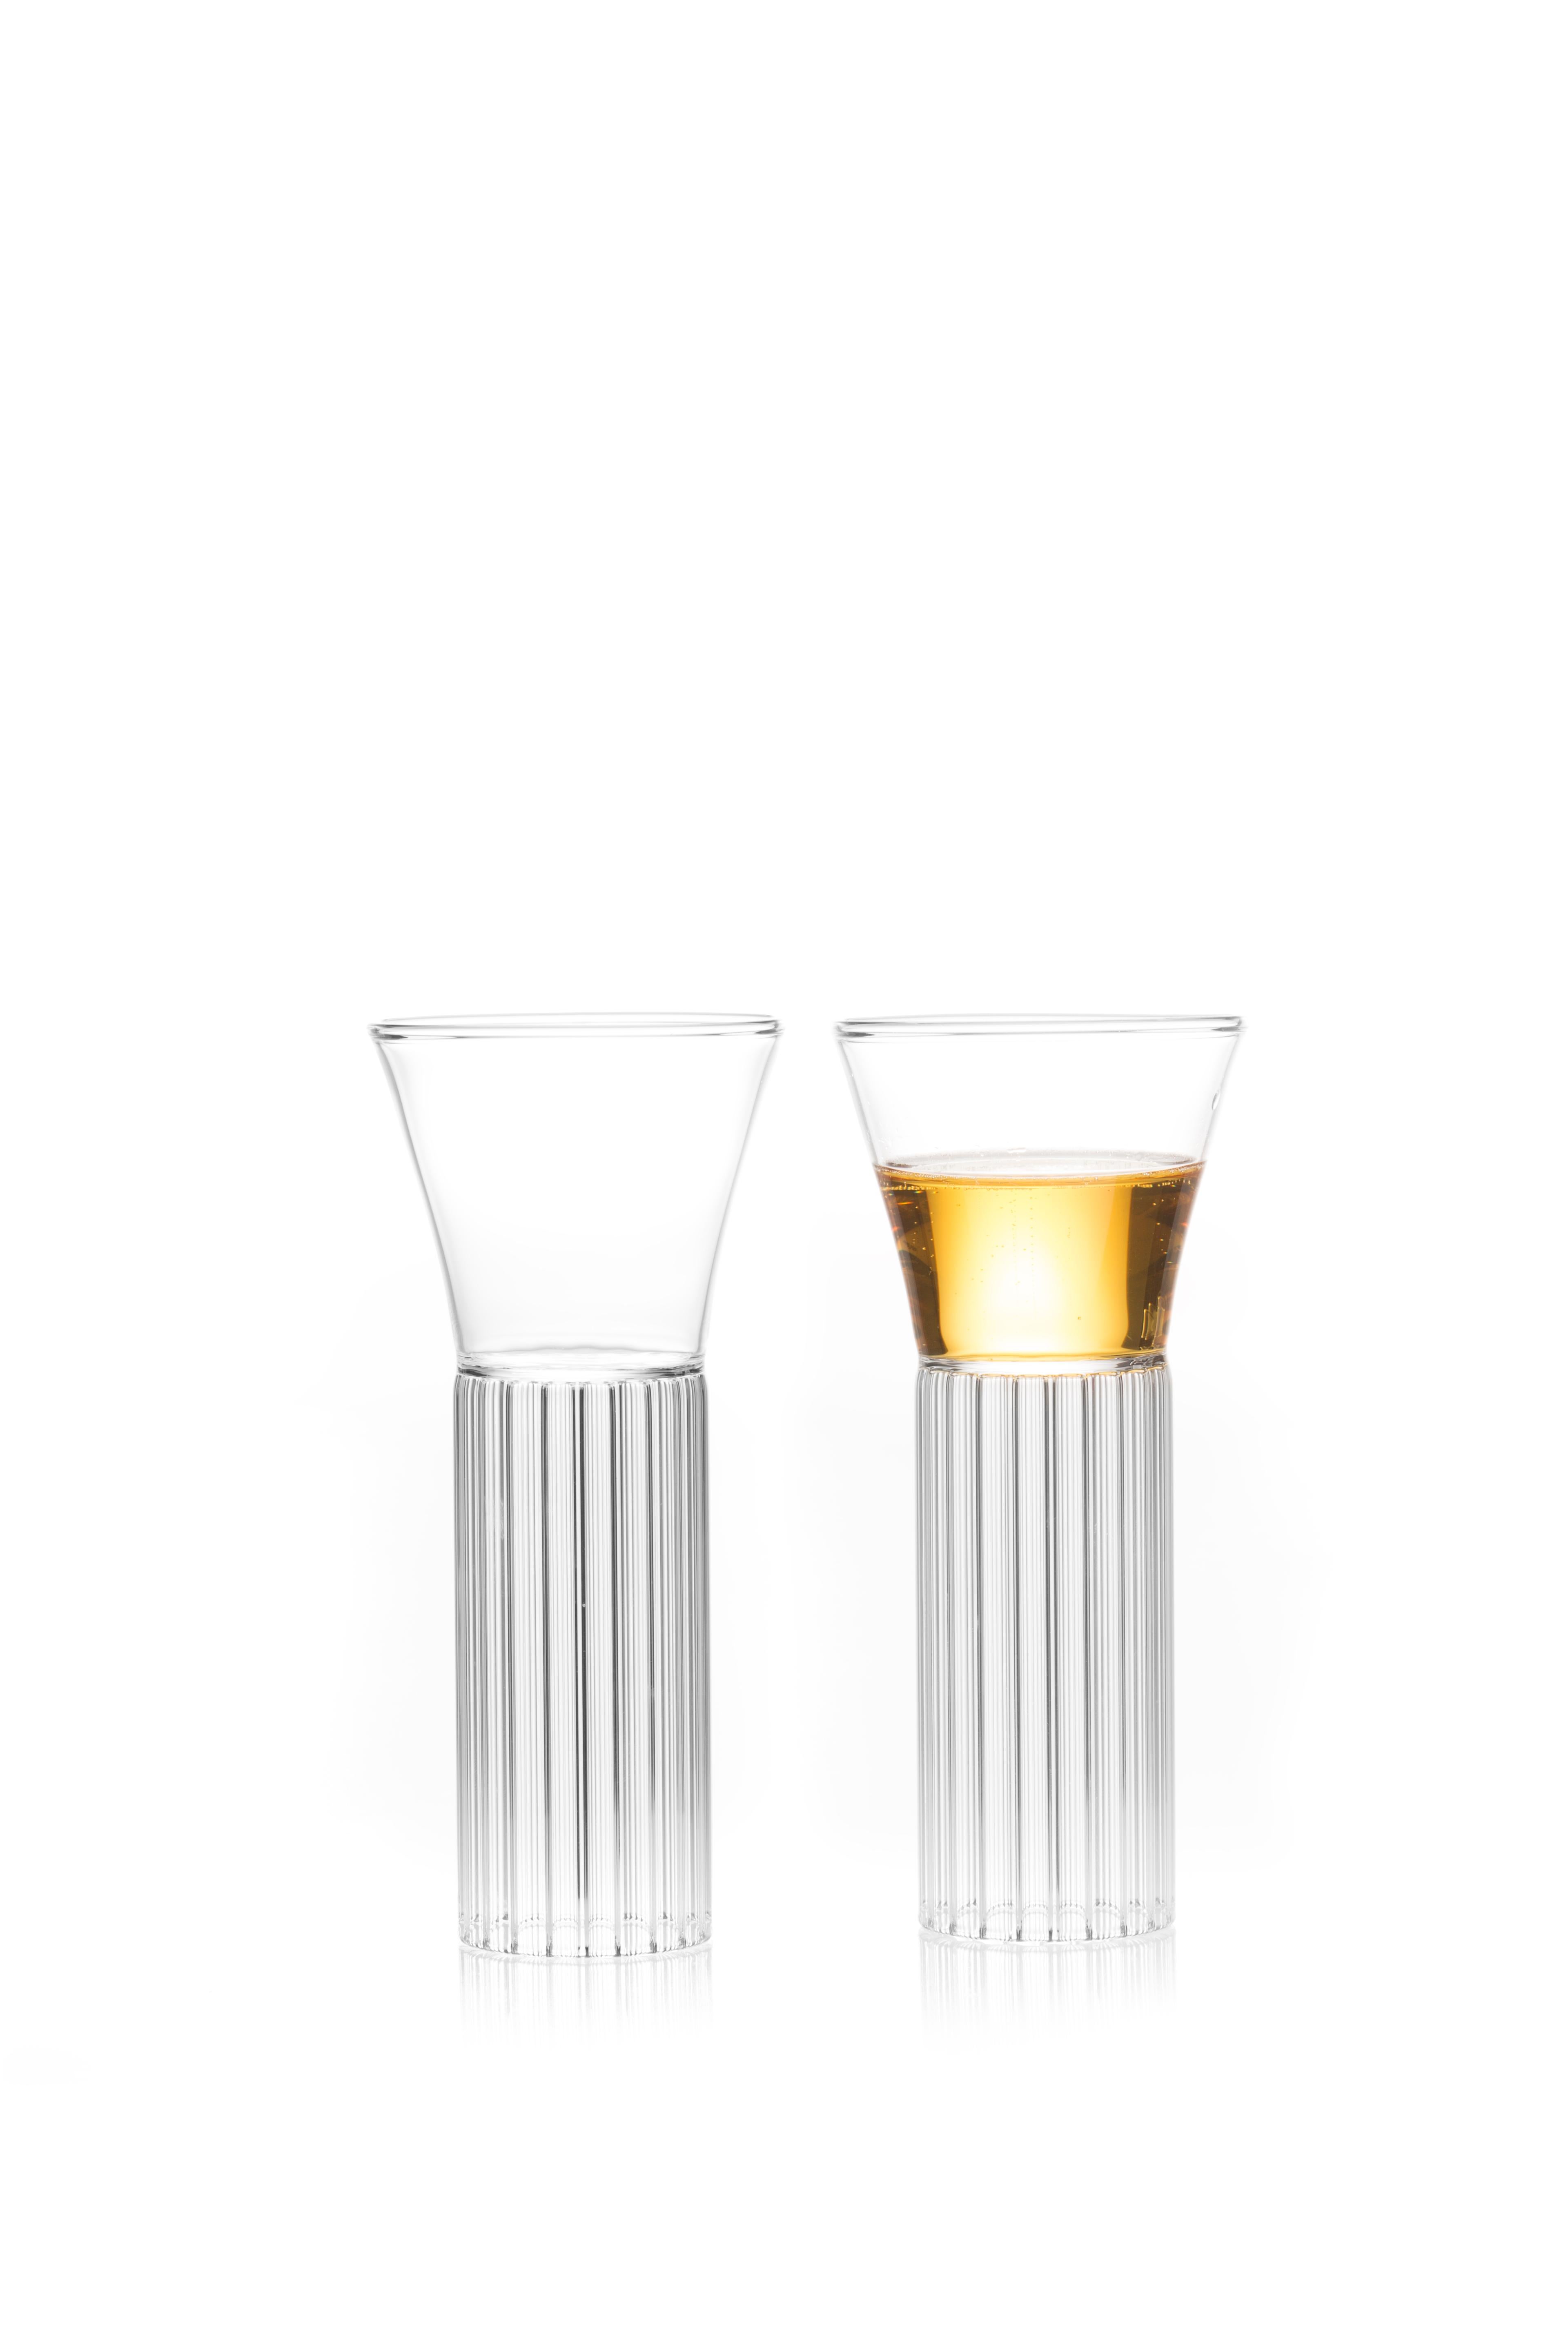 Sofia small cocktail wine glasses, set of two

With the elegance of a forgotten time, the clear Czech contemporary Sofia collection glasses are a series of barware ideal for beverages from wine and water to martinis and other libations. Strikingly